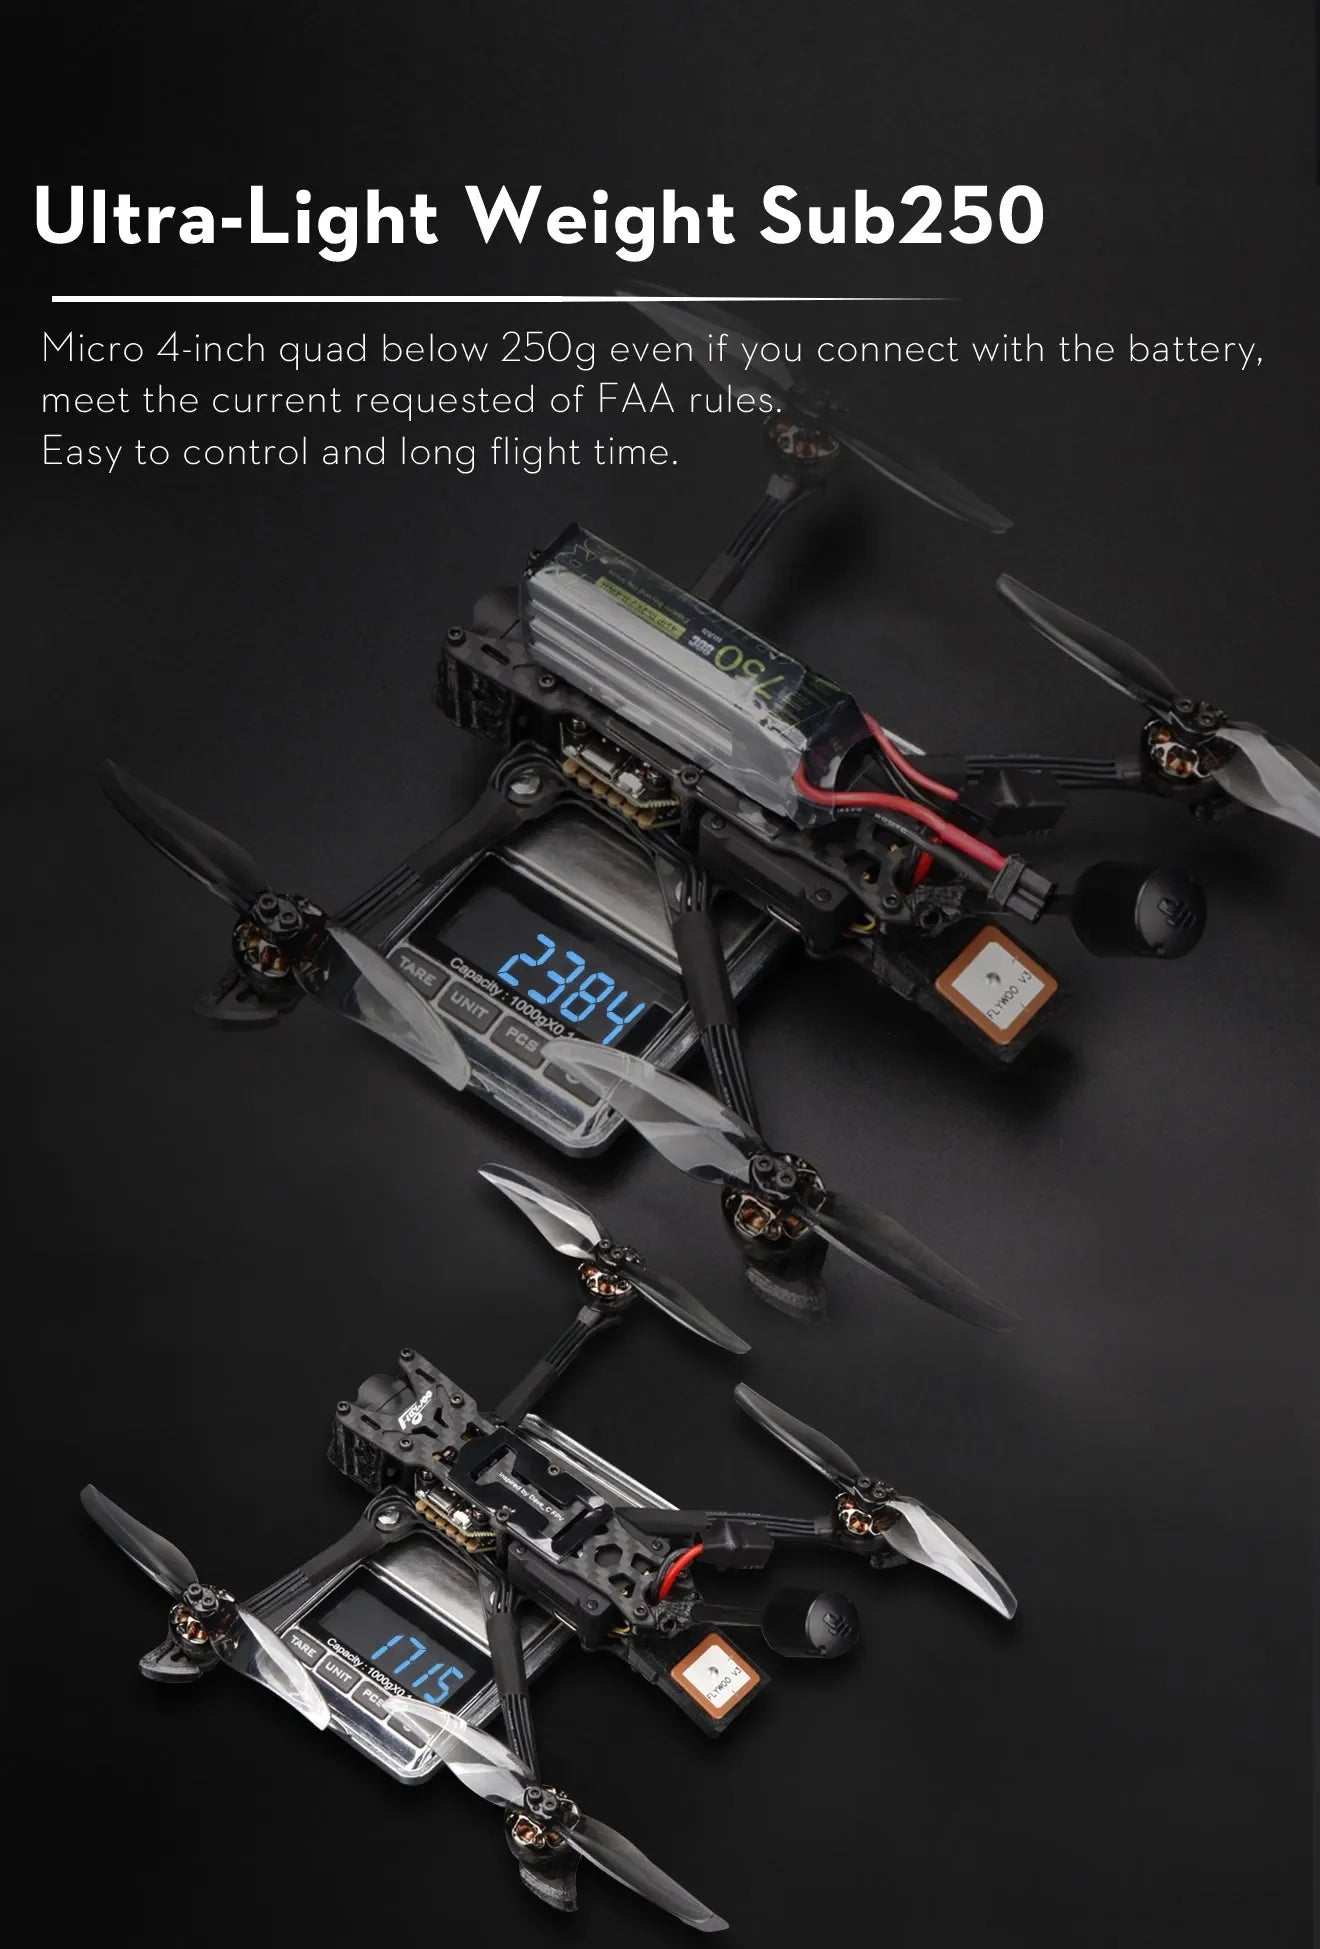 Sub250 Micro 4-inch quad below even if you connect with the battery, meet the current